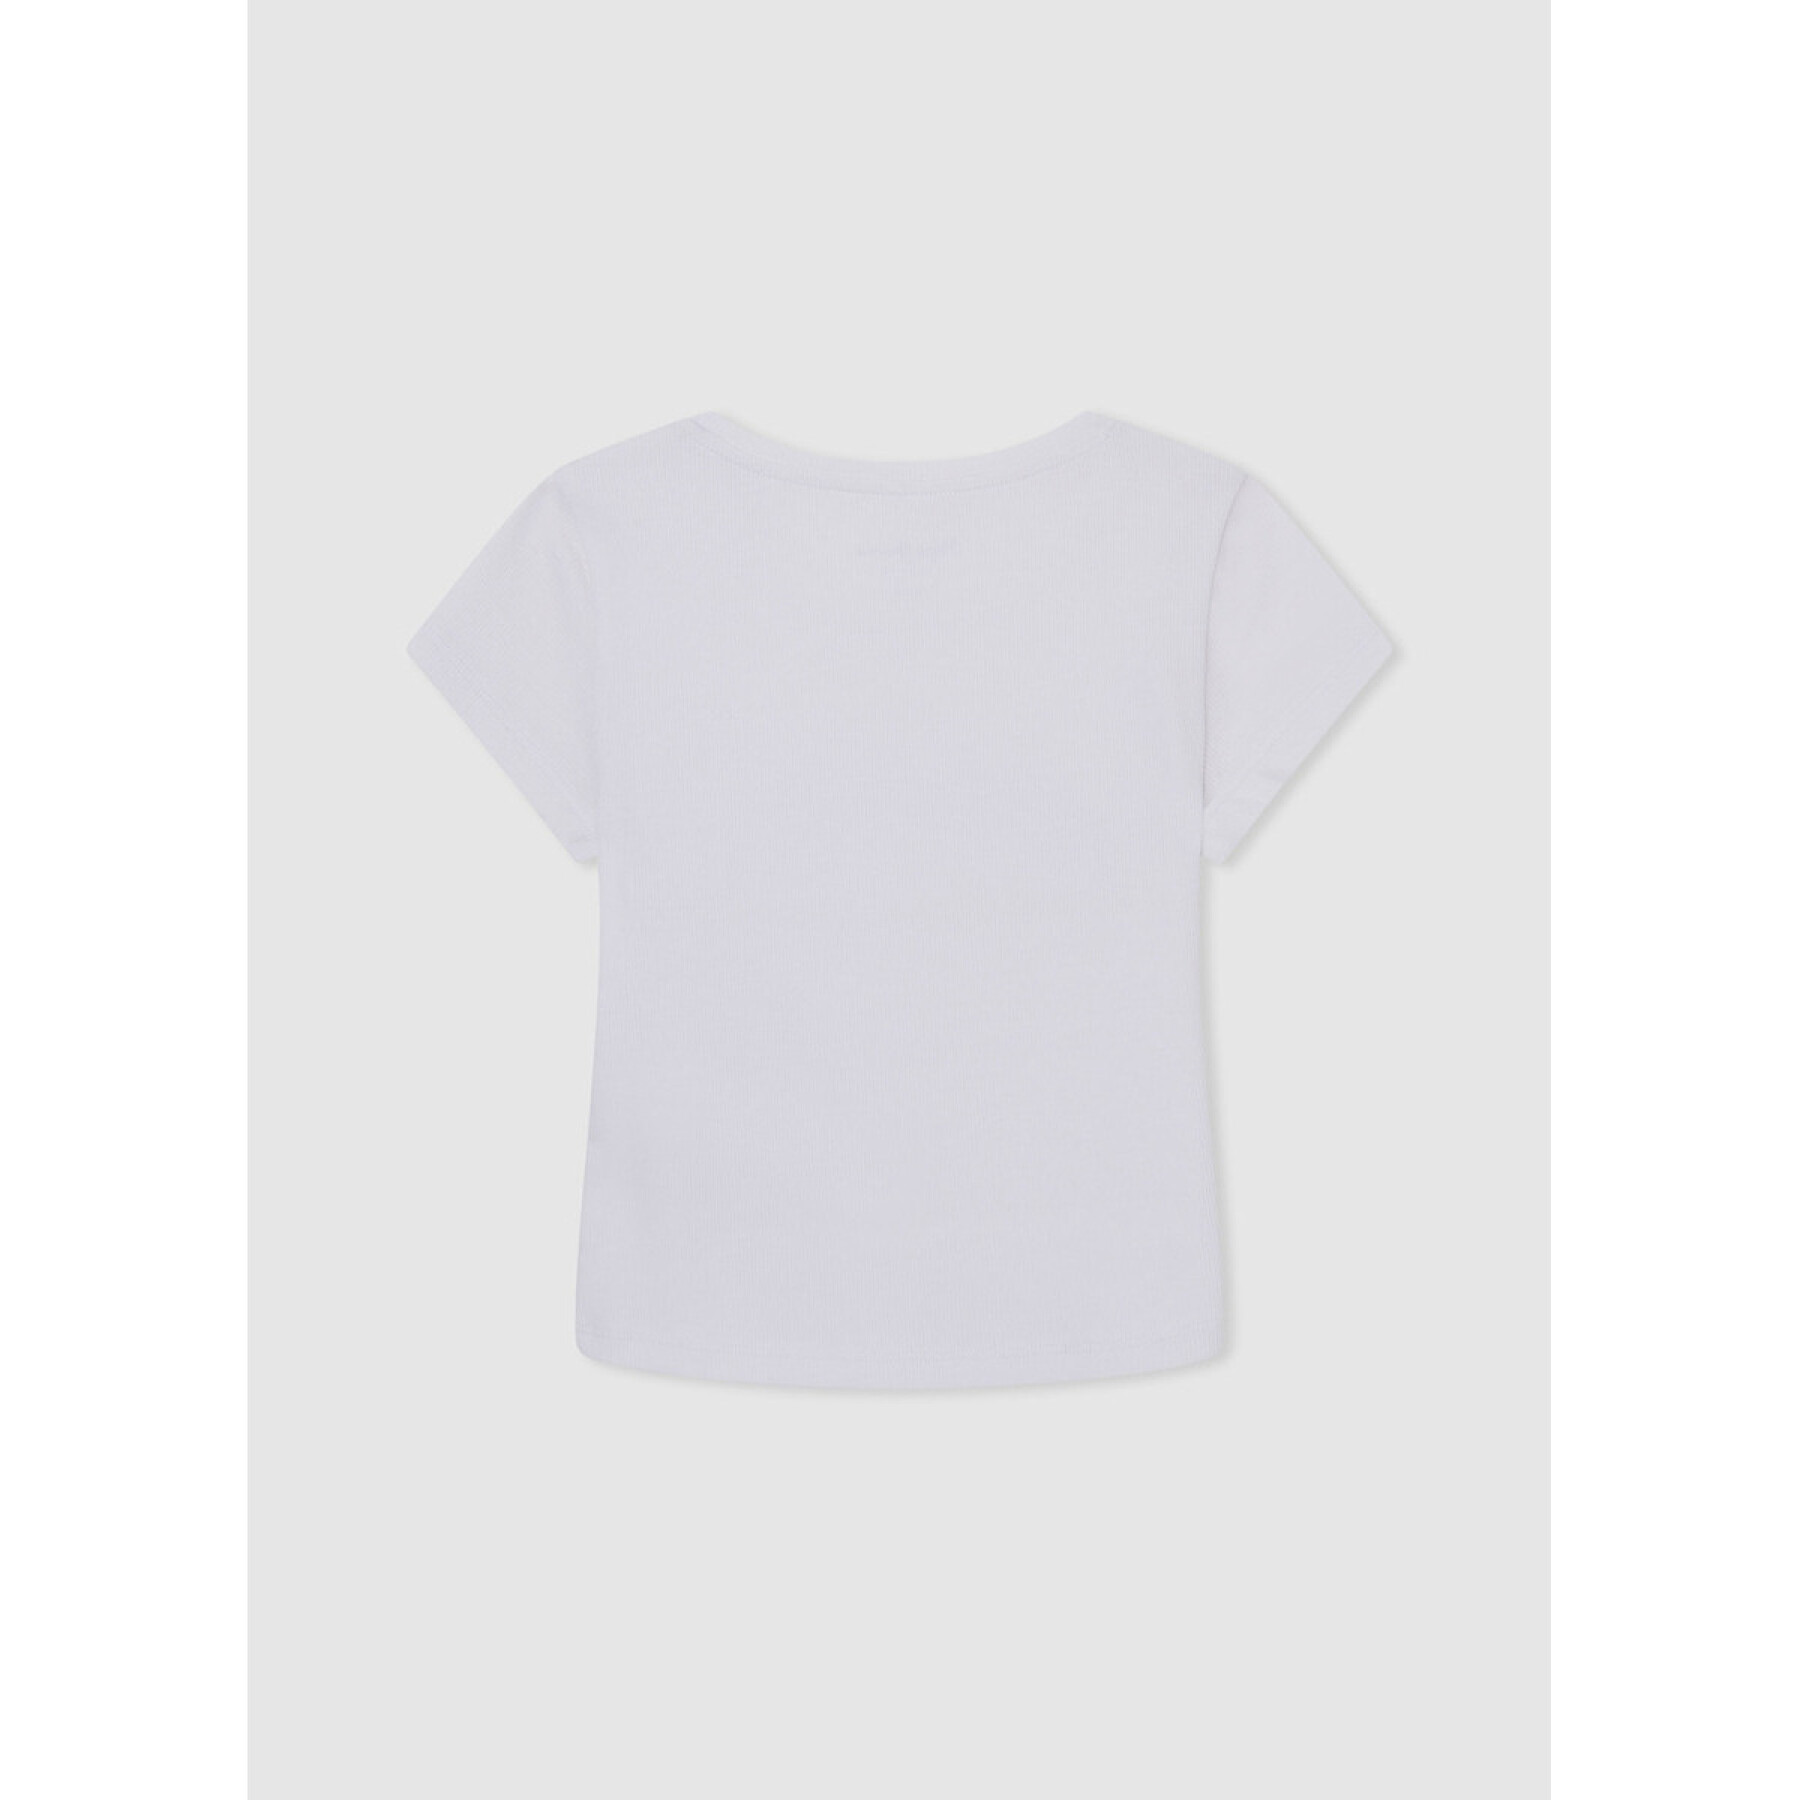 T-Shirt Pepe Jeans Nicolle